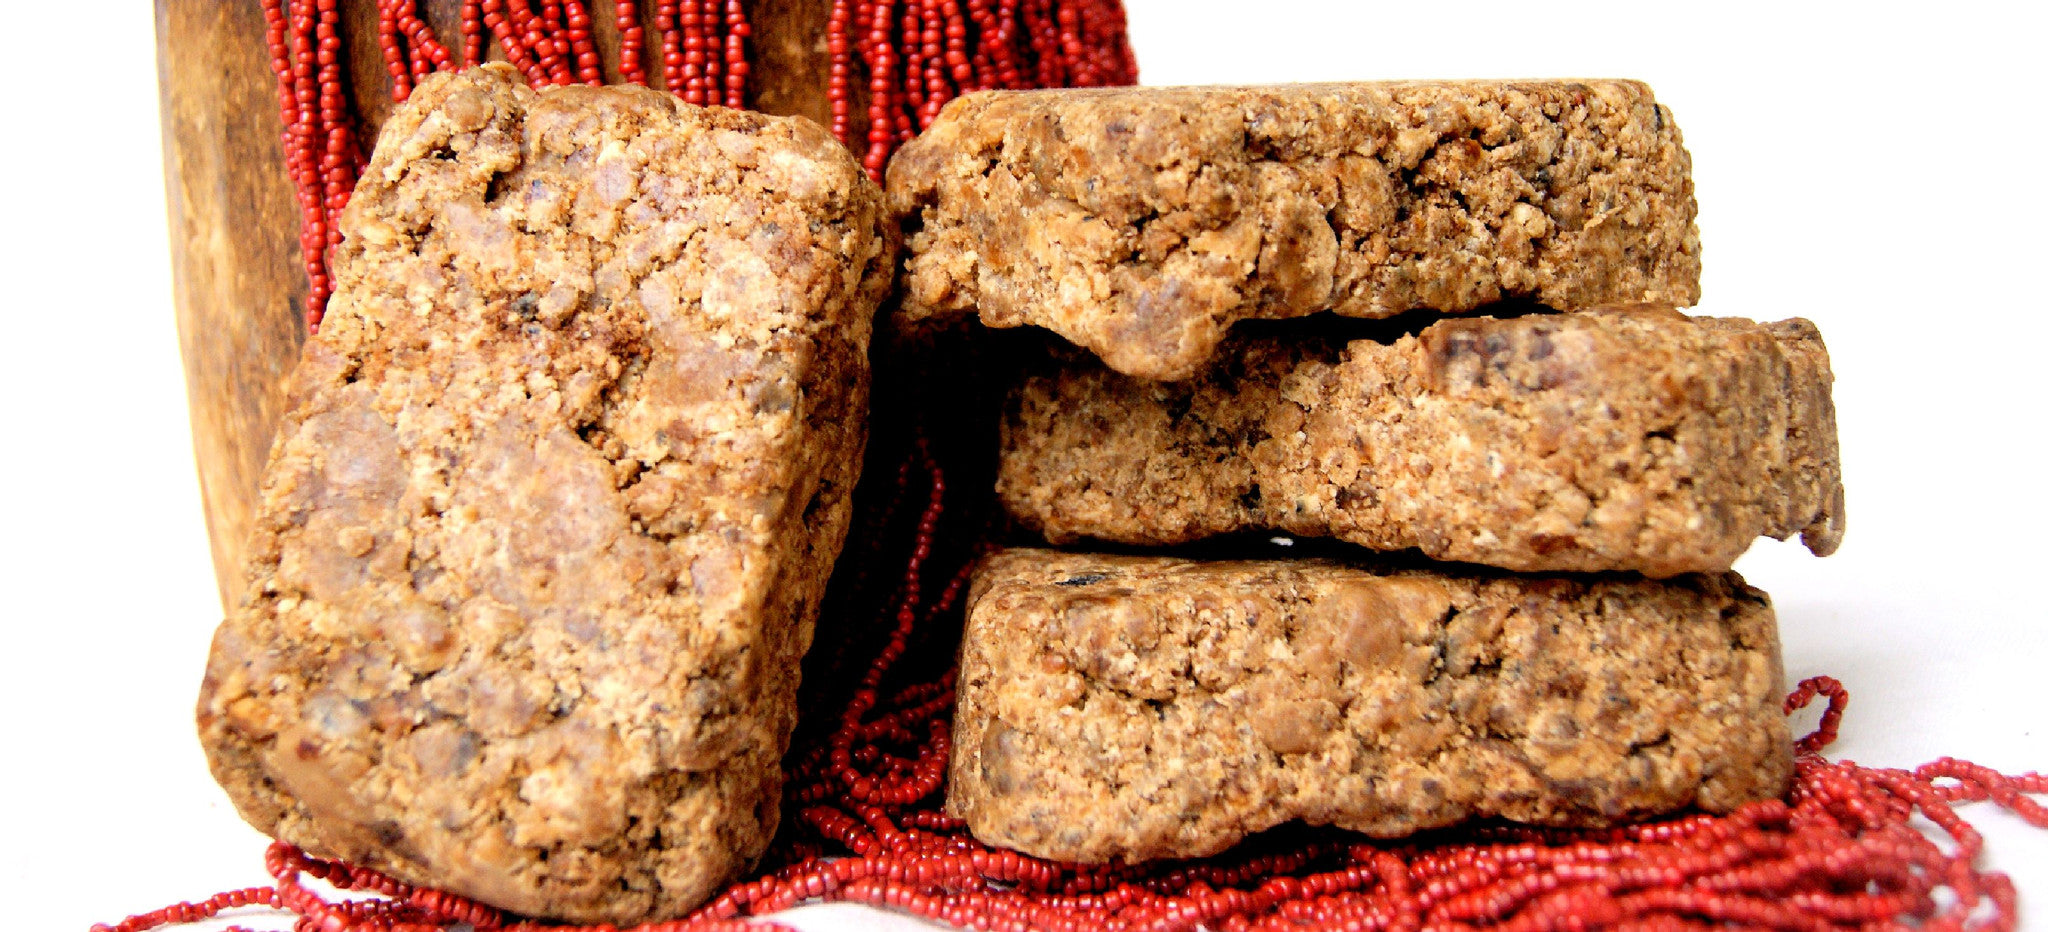 Sweet Harvest Farms authentic Organic African Black Soap. The real deal! This is not fake black soap as you see most places.